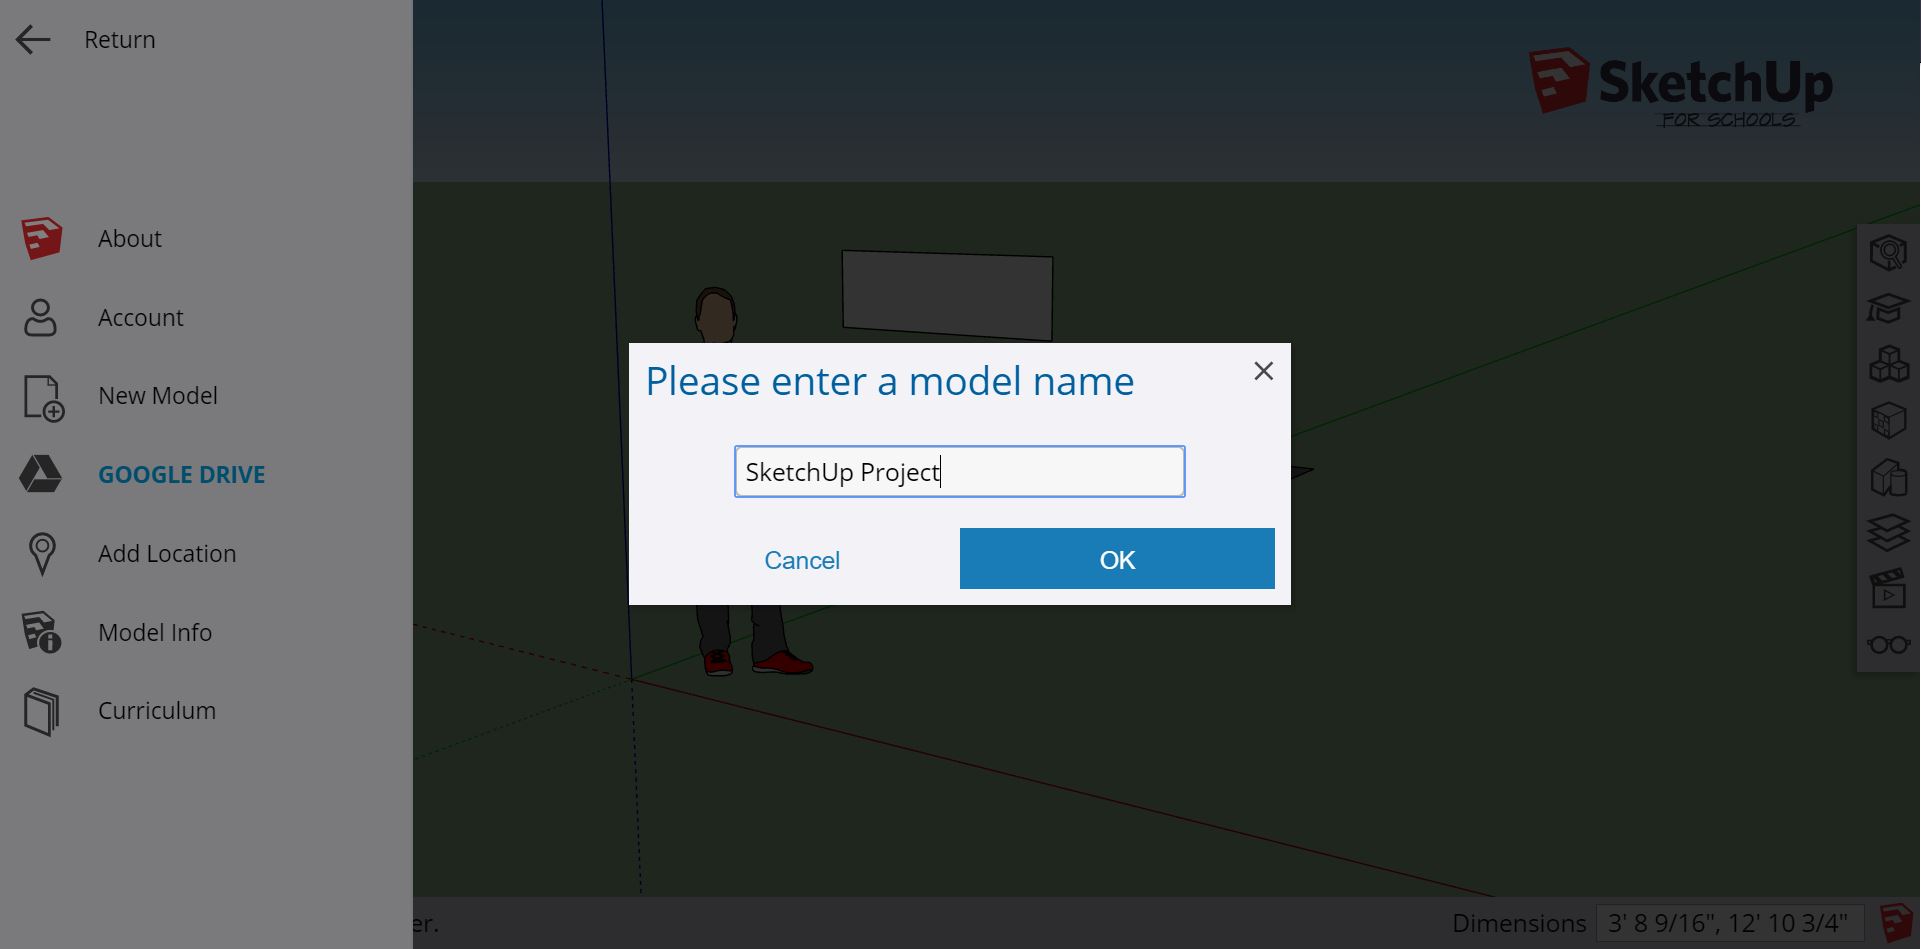 When you save a model, Google Drive prompts you for a model name